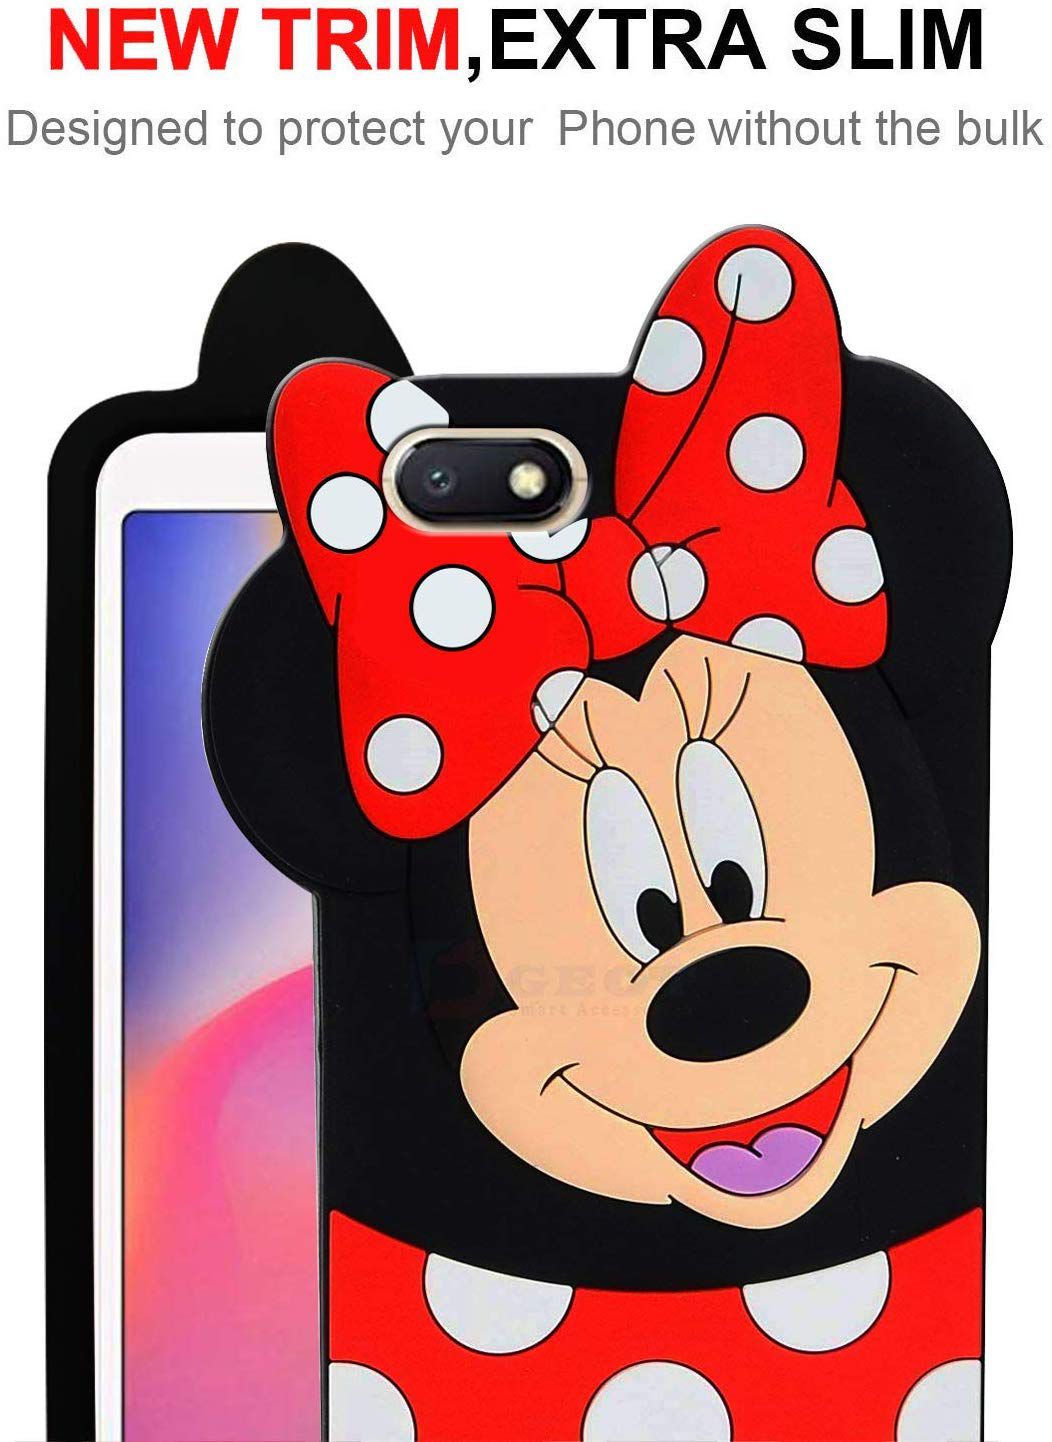 Xiaomi Redmi Note 4 Plain Cases KOVADO - Multi 3D Girlish Cute Mickey Mouse Back  Cover - Plain Back Covers Online at Low Prices | Snapdeal India